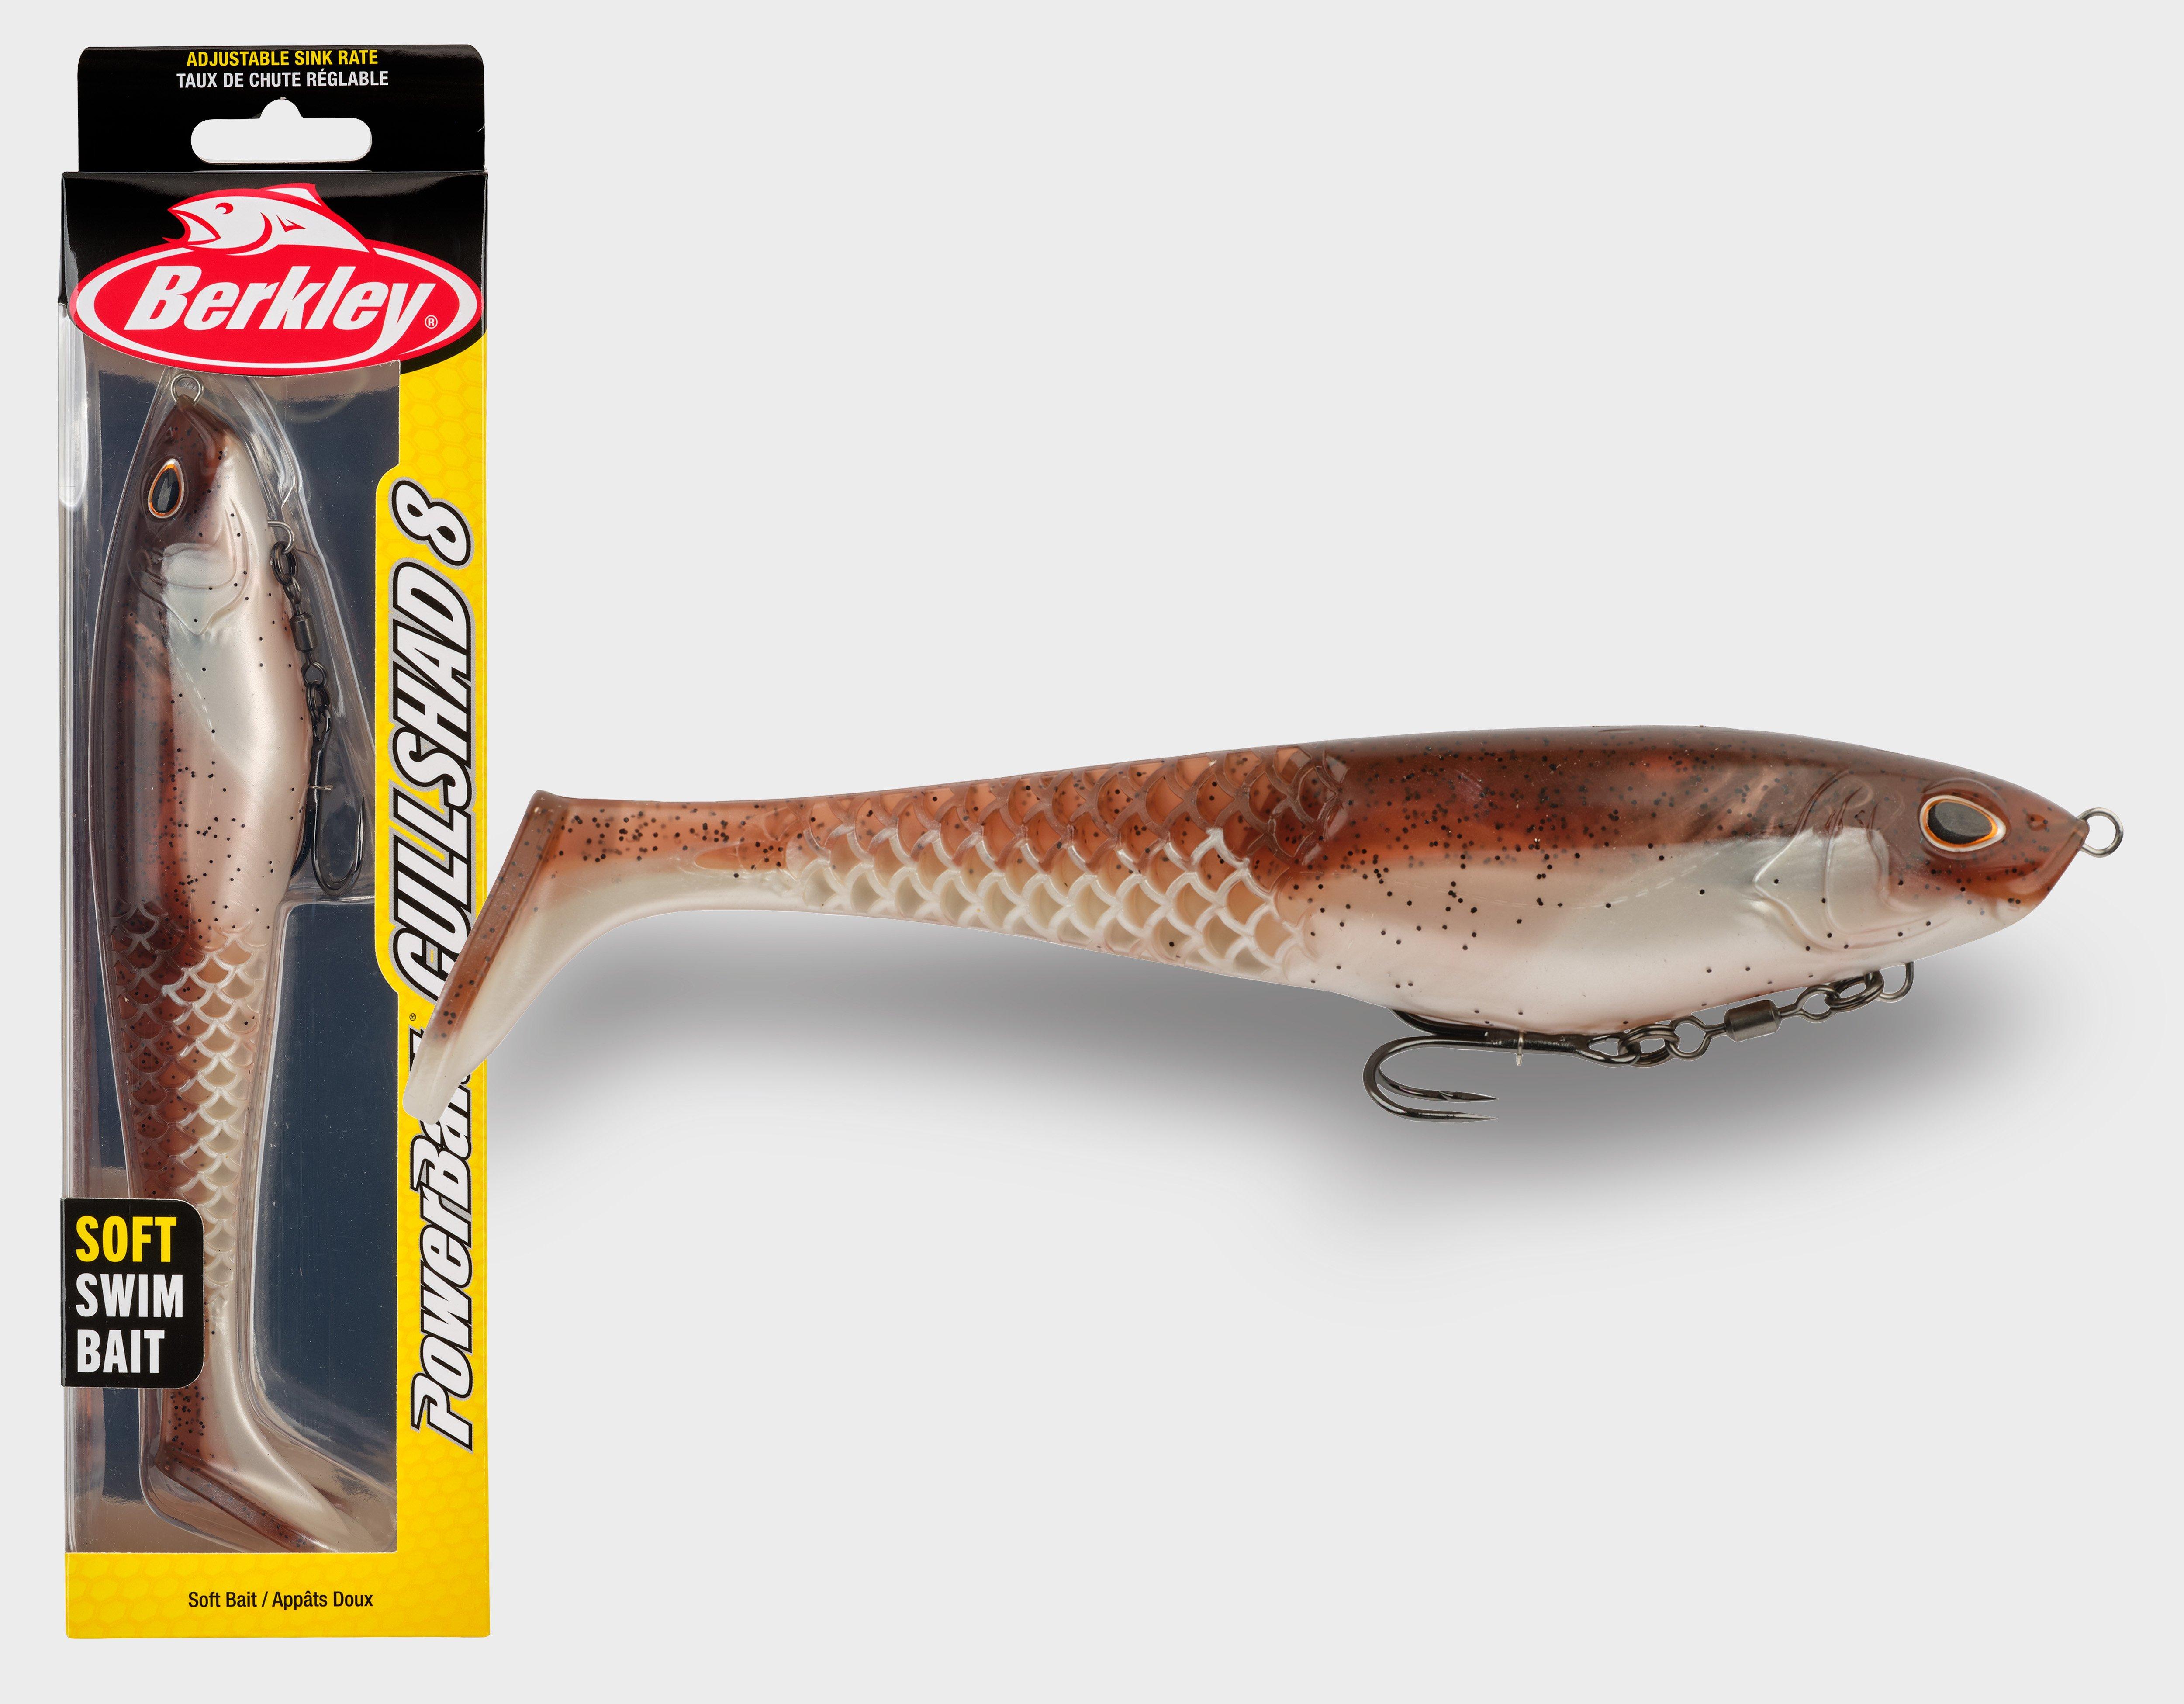  Berkley PowerBait CullShad Fishing Bait, Albino, 6in,  Irresistible Scent and Flavor, Ideal for Bass, Walleye, Pike and More,  Equipped with Fusion19 Hook : Sports & Outdoors